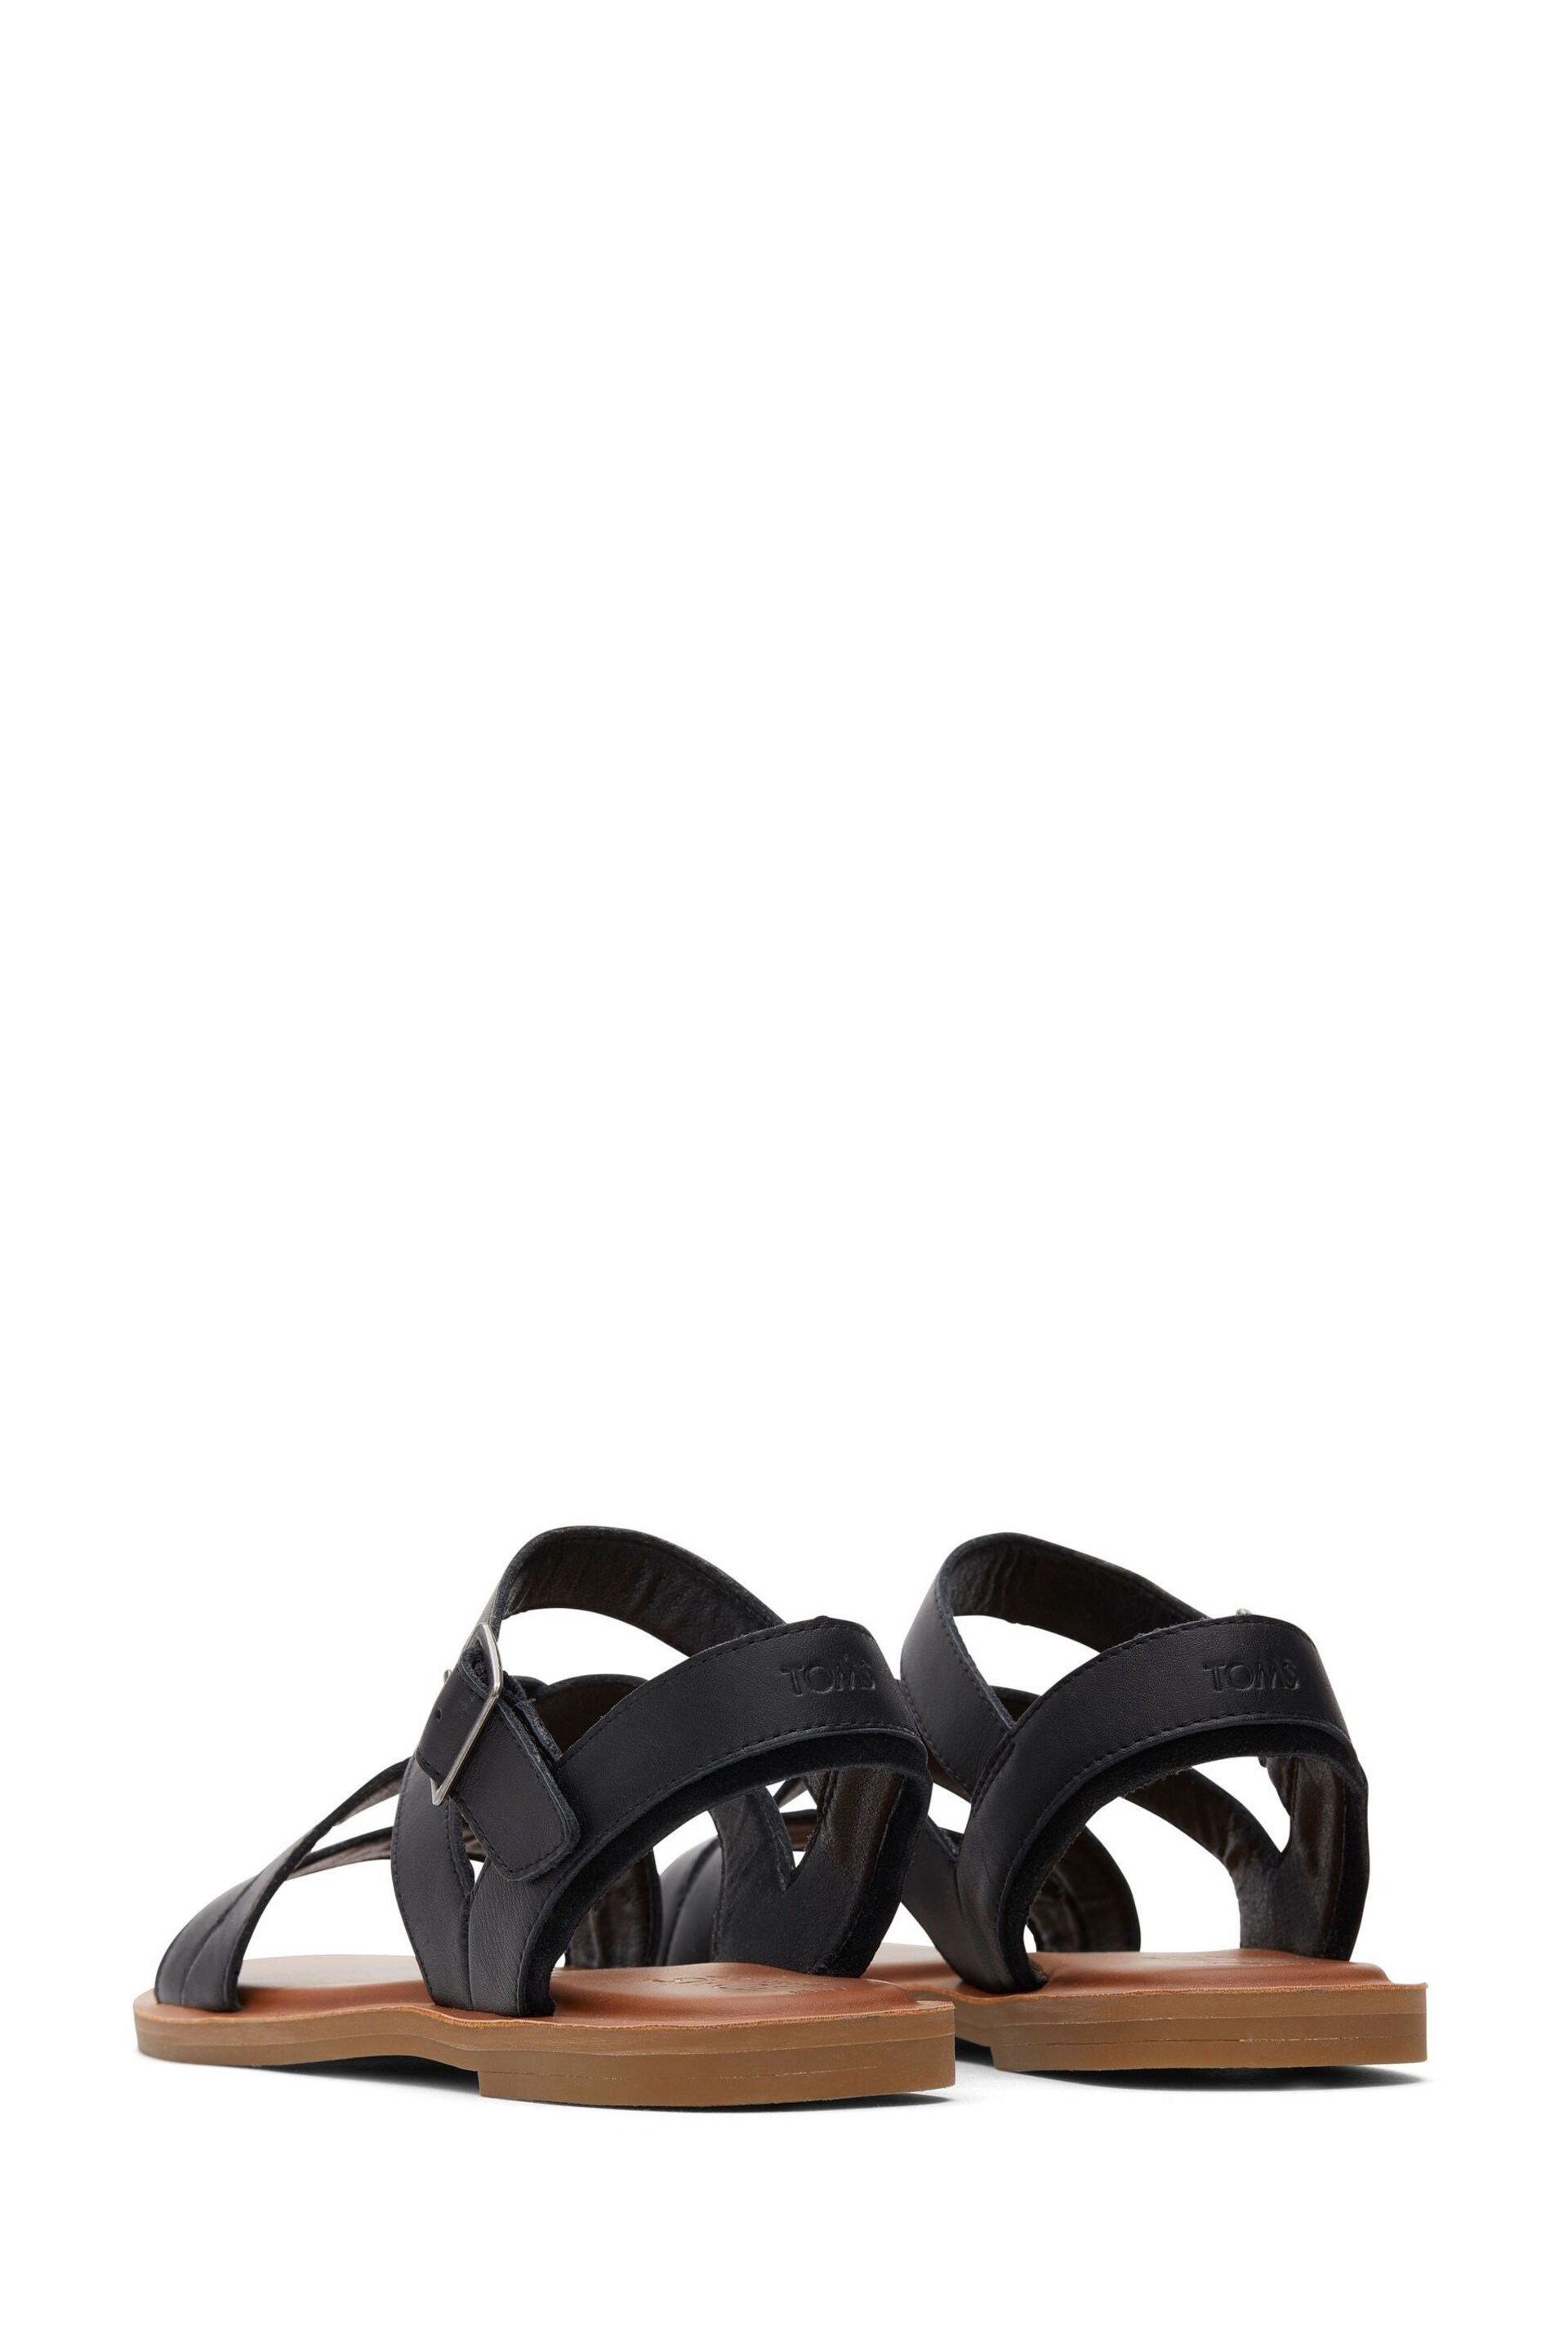 TOMS Sloane Black Sandals In Leather - Image 4 of 6